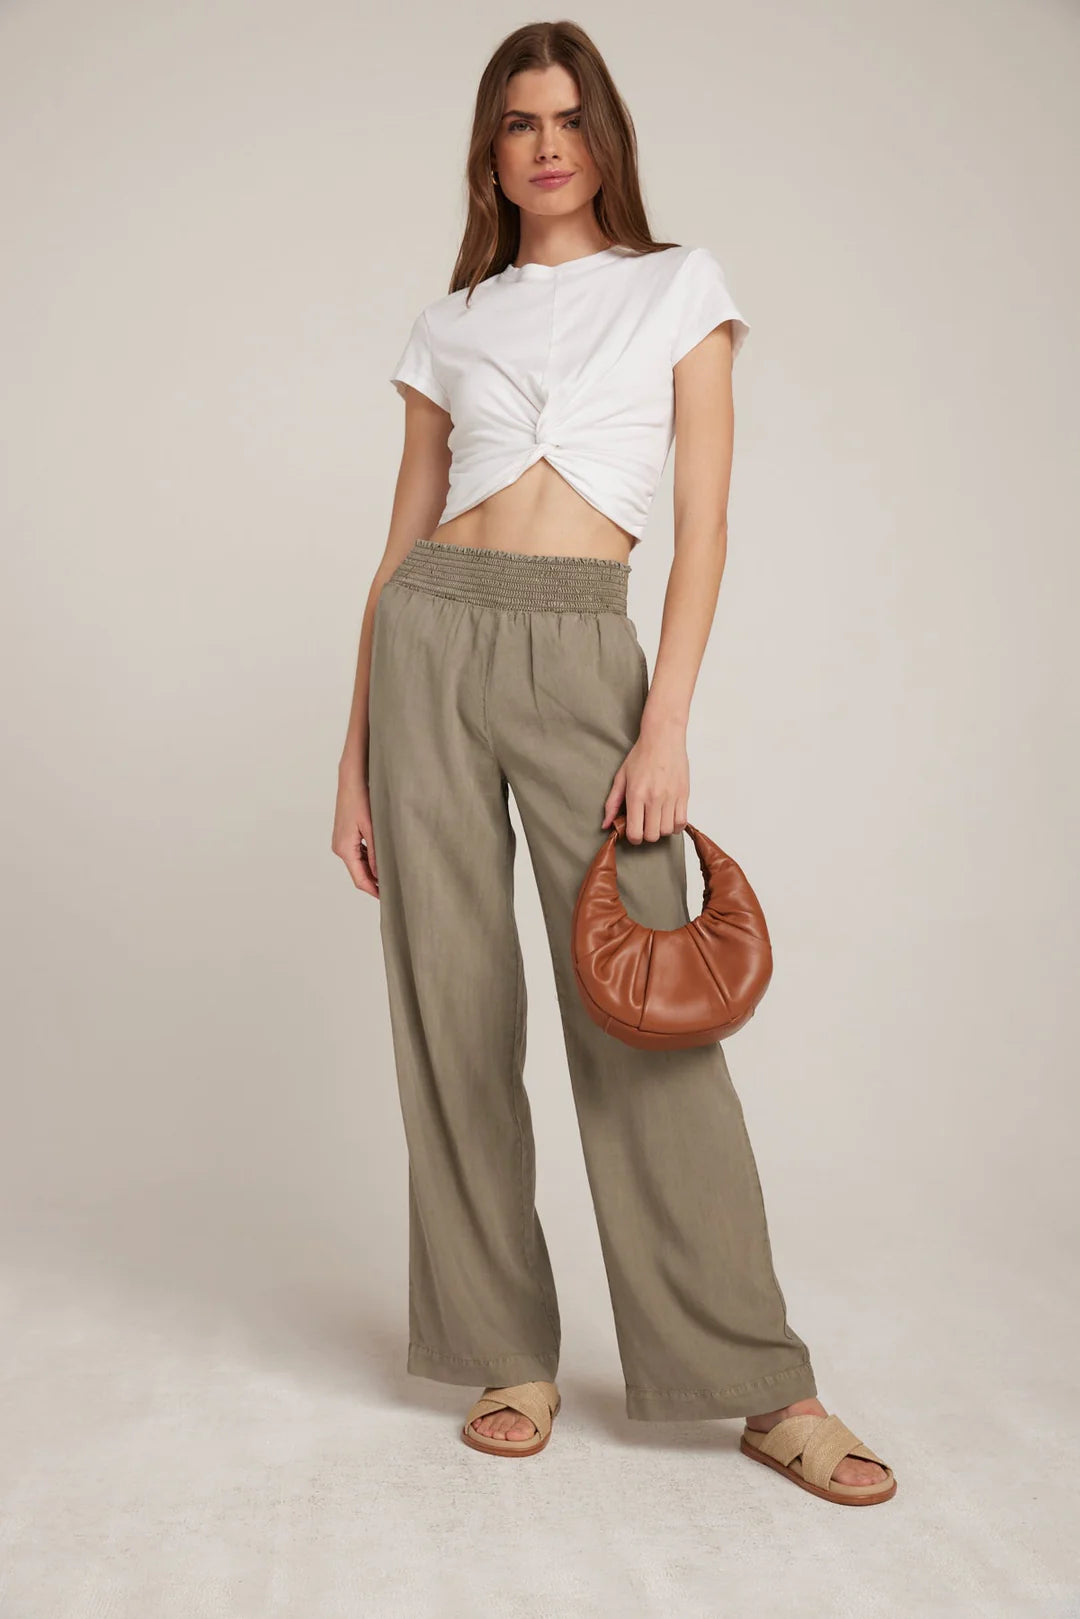 Y/Project Pop-up Raver Layered Trousers - Farfetch